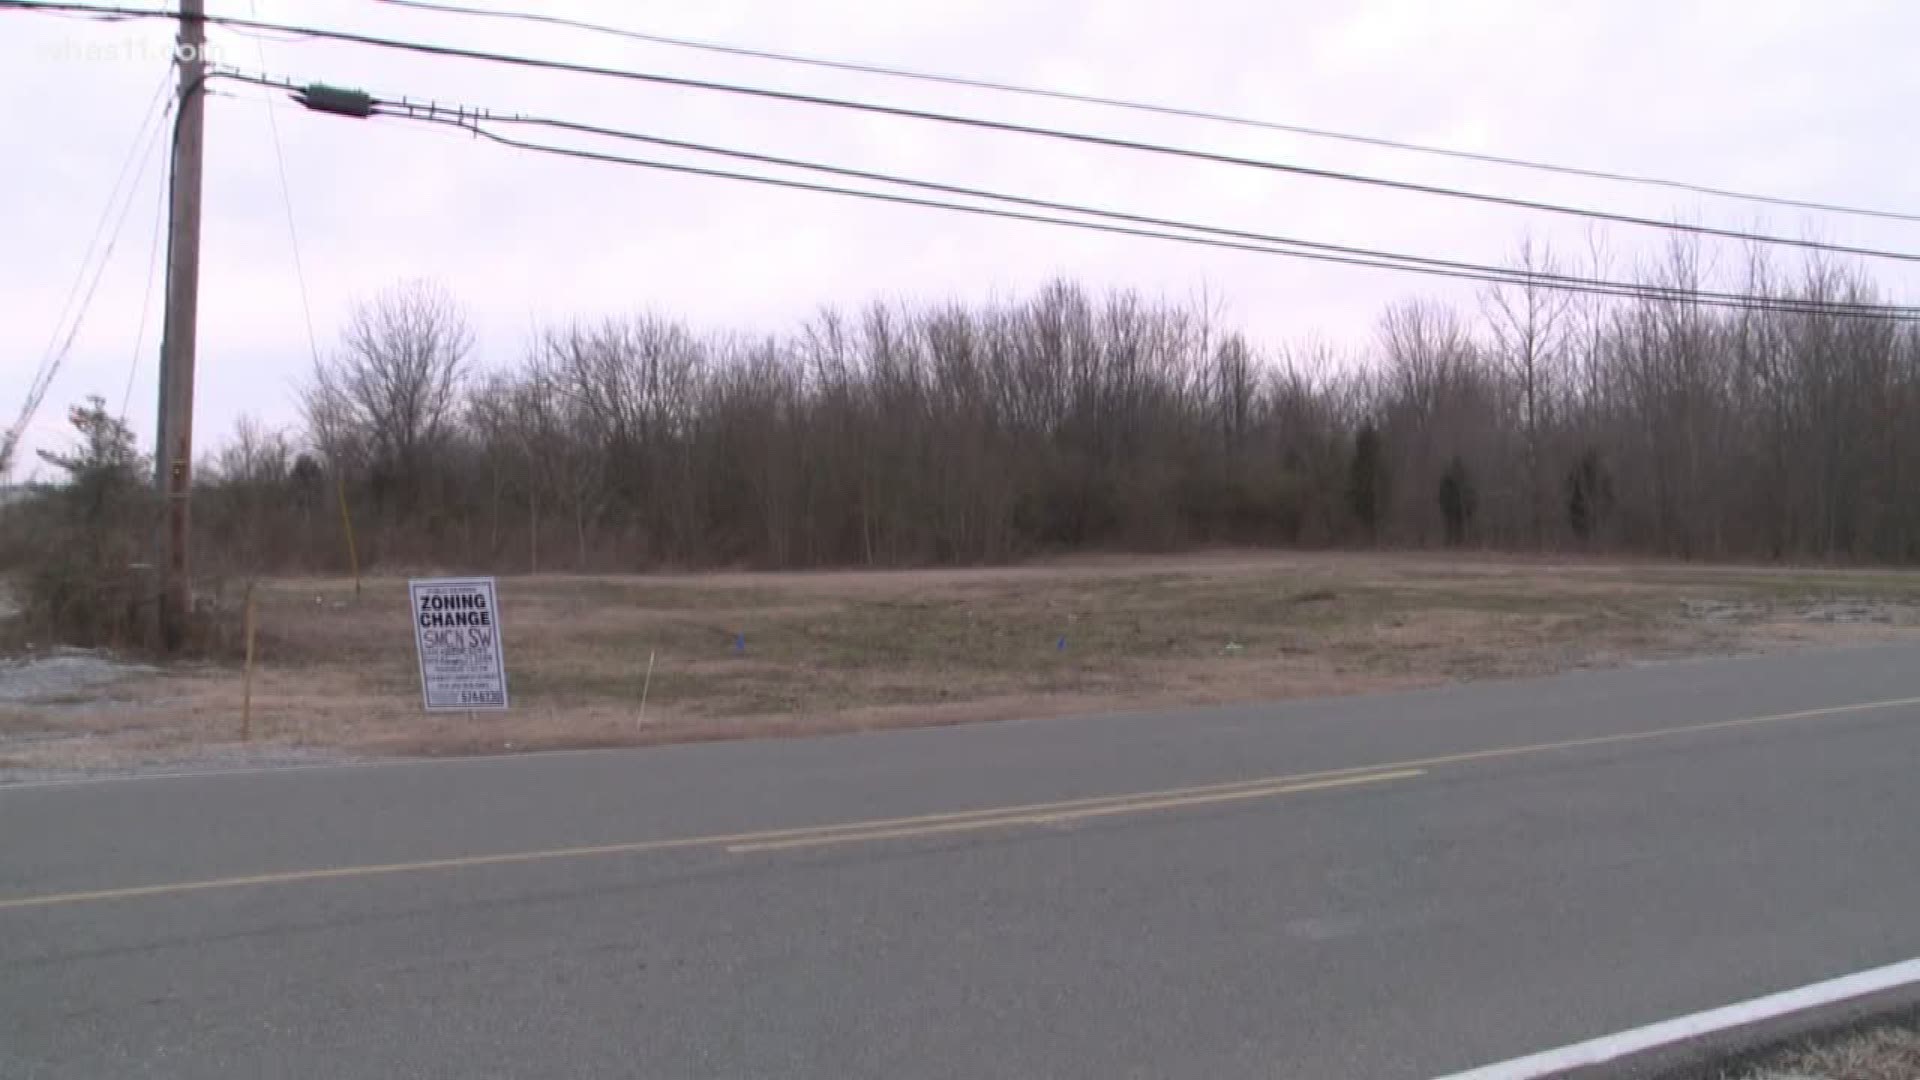 Homeowners in Okolona are putting their foot down on a proposed commerical development they say will be too big and too noisy. Ahead of an expected vote by the Louisville Planning Commission this Thursday, those homeowners are trying to get support in their efforts to block any construction.